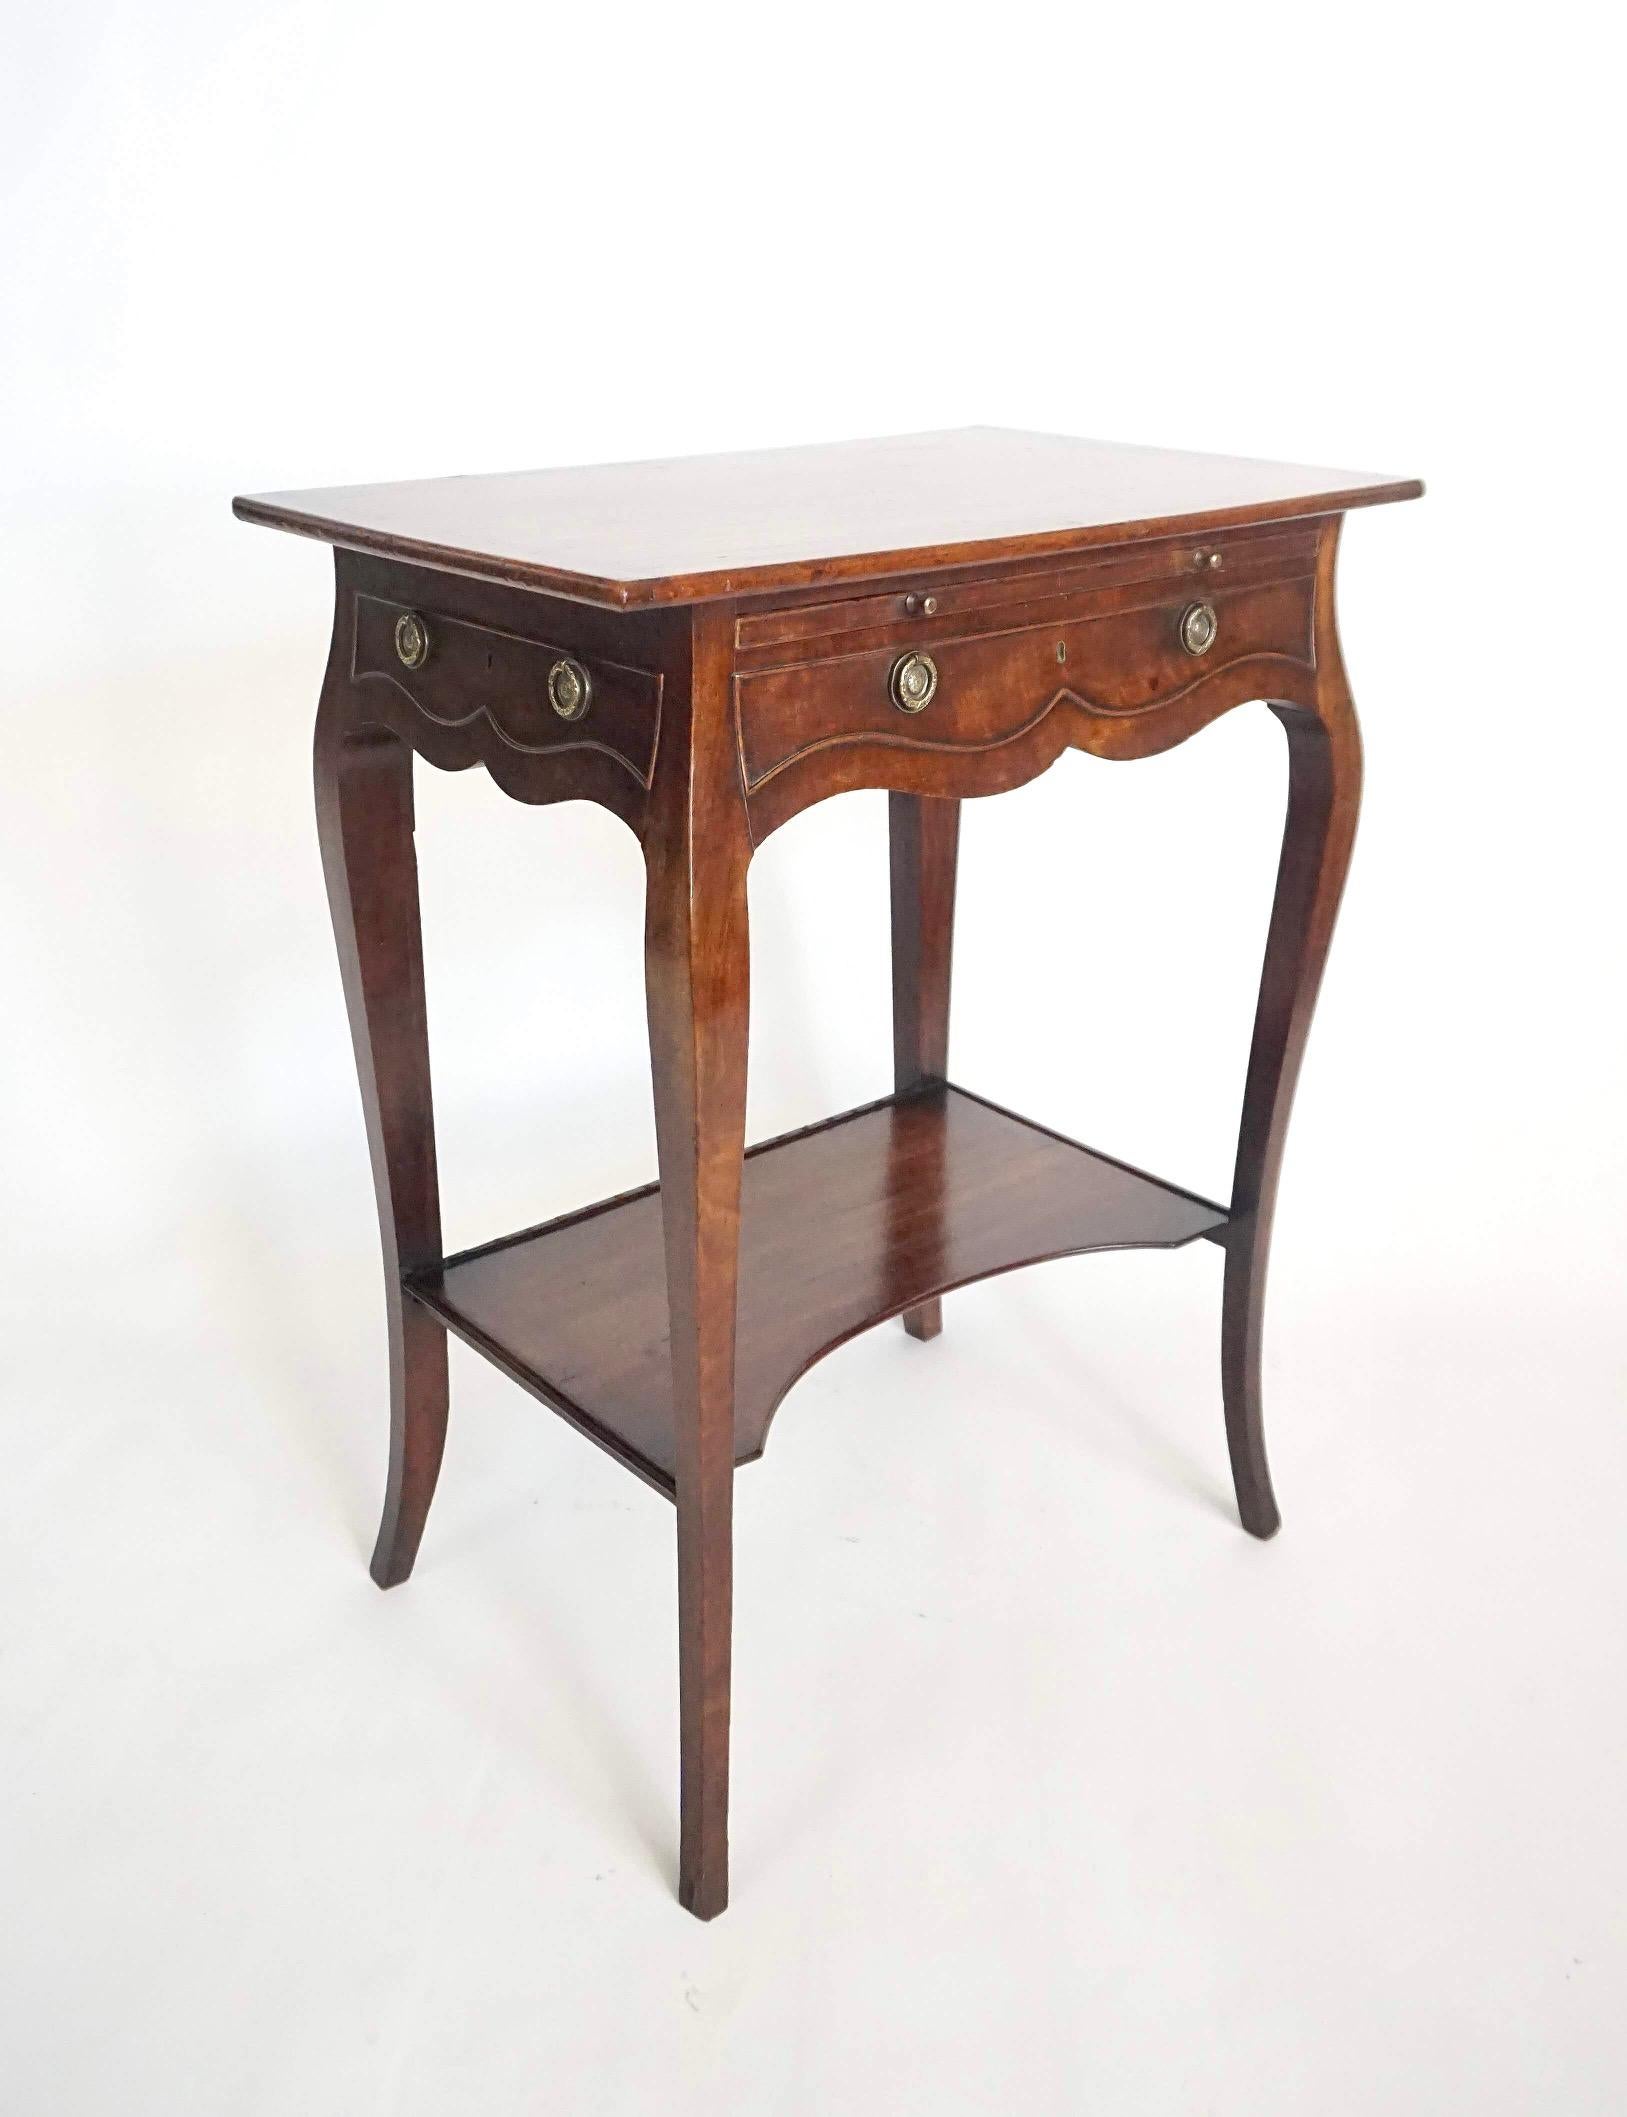 A English circa 1770 early George III period sabicu and gonçalo alves lady's writing or work table in the 'French' or rococo style of John Cobb and Pierre Langlois, the rectangular top above a felted brushing slide with brass knob pulls and faux